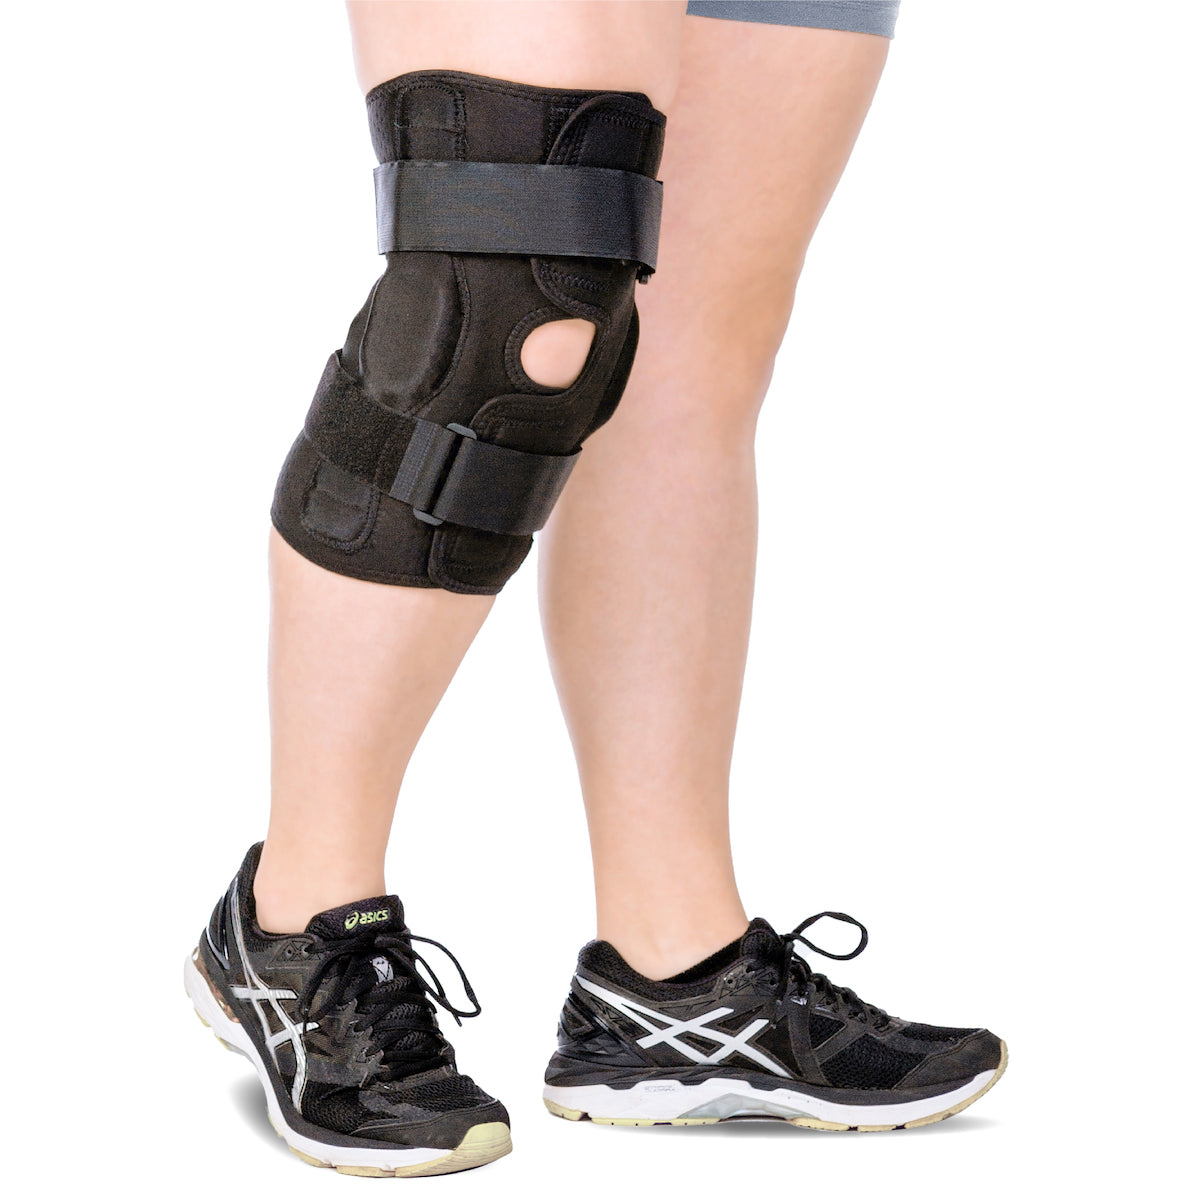 The BraceAbility hinged, range of motion knee brace reduces how far the leg can bend after surgery or an injury